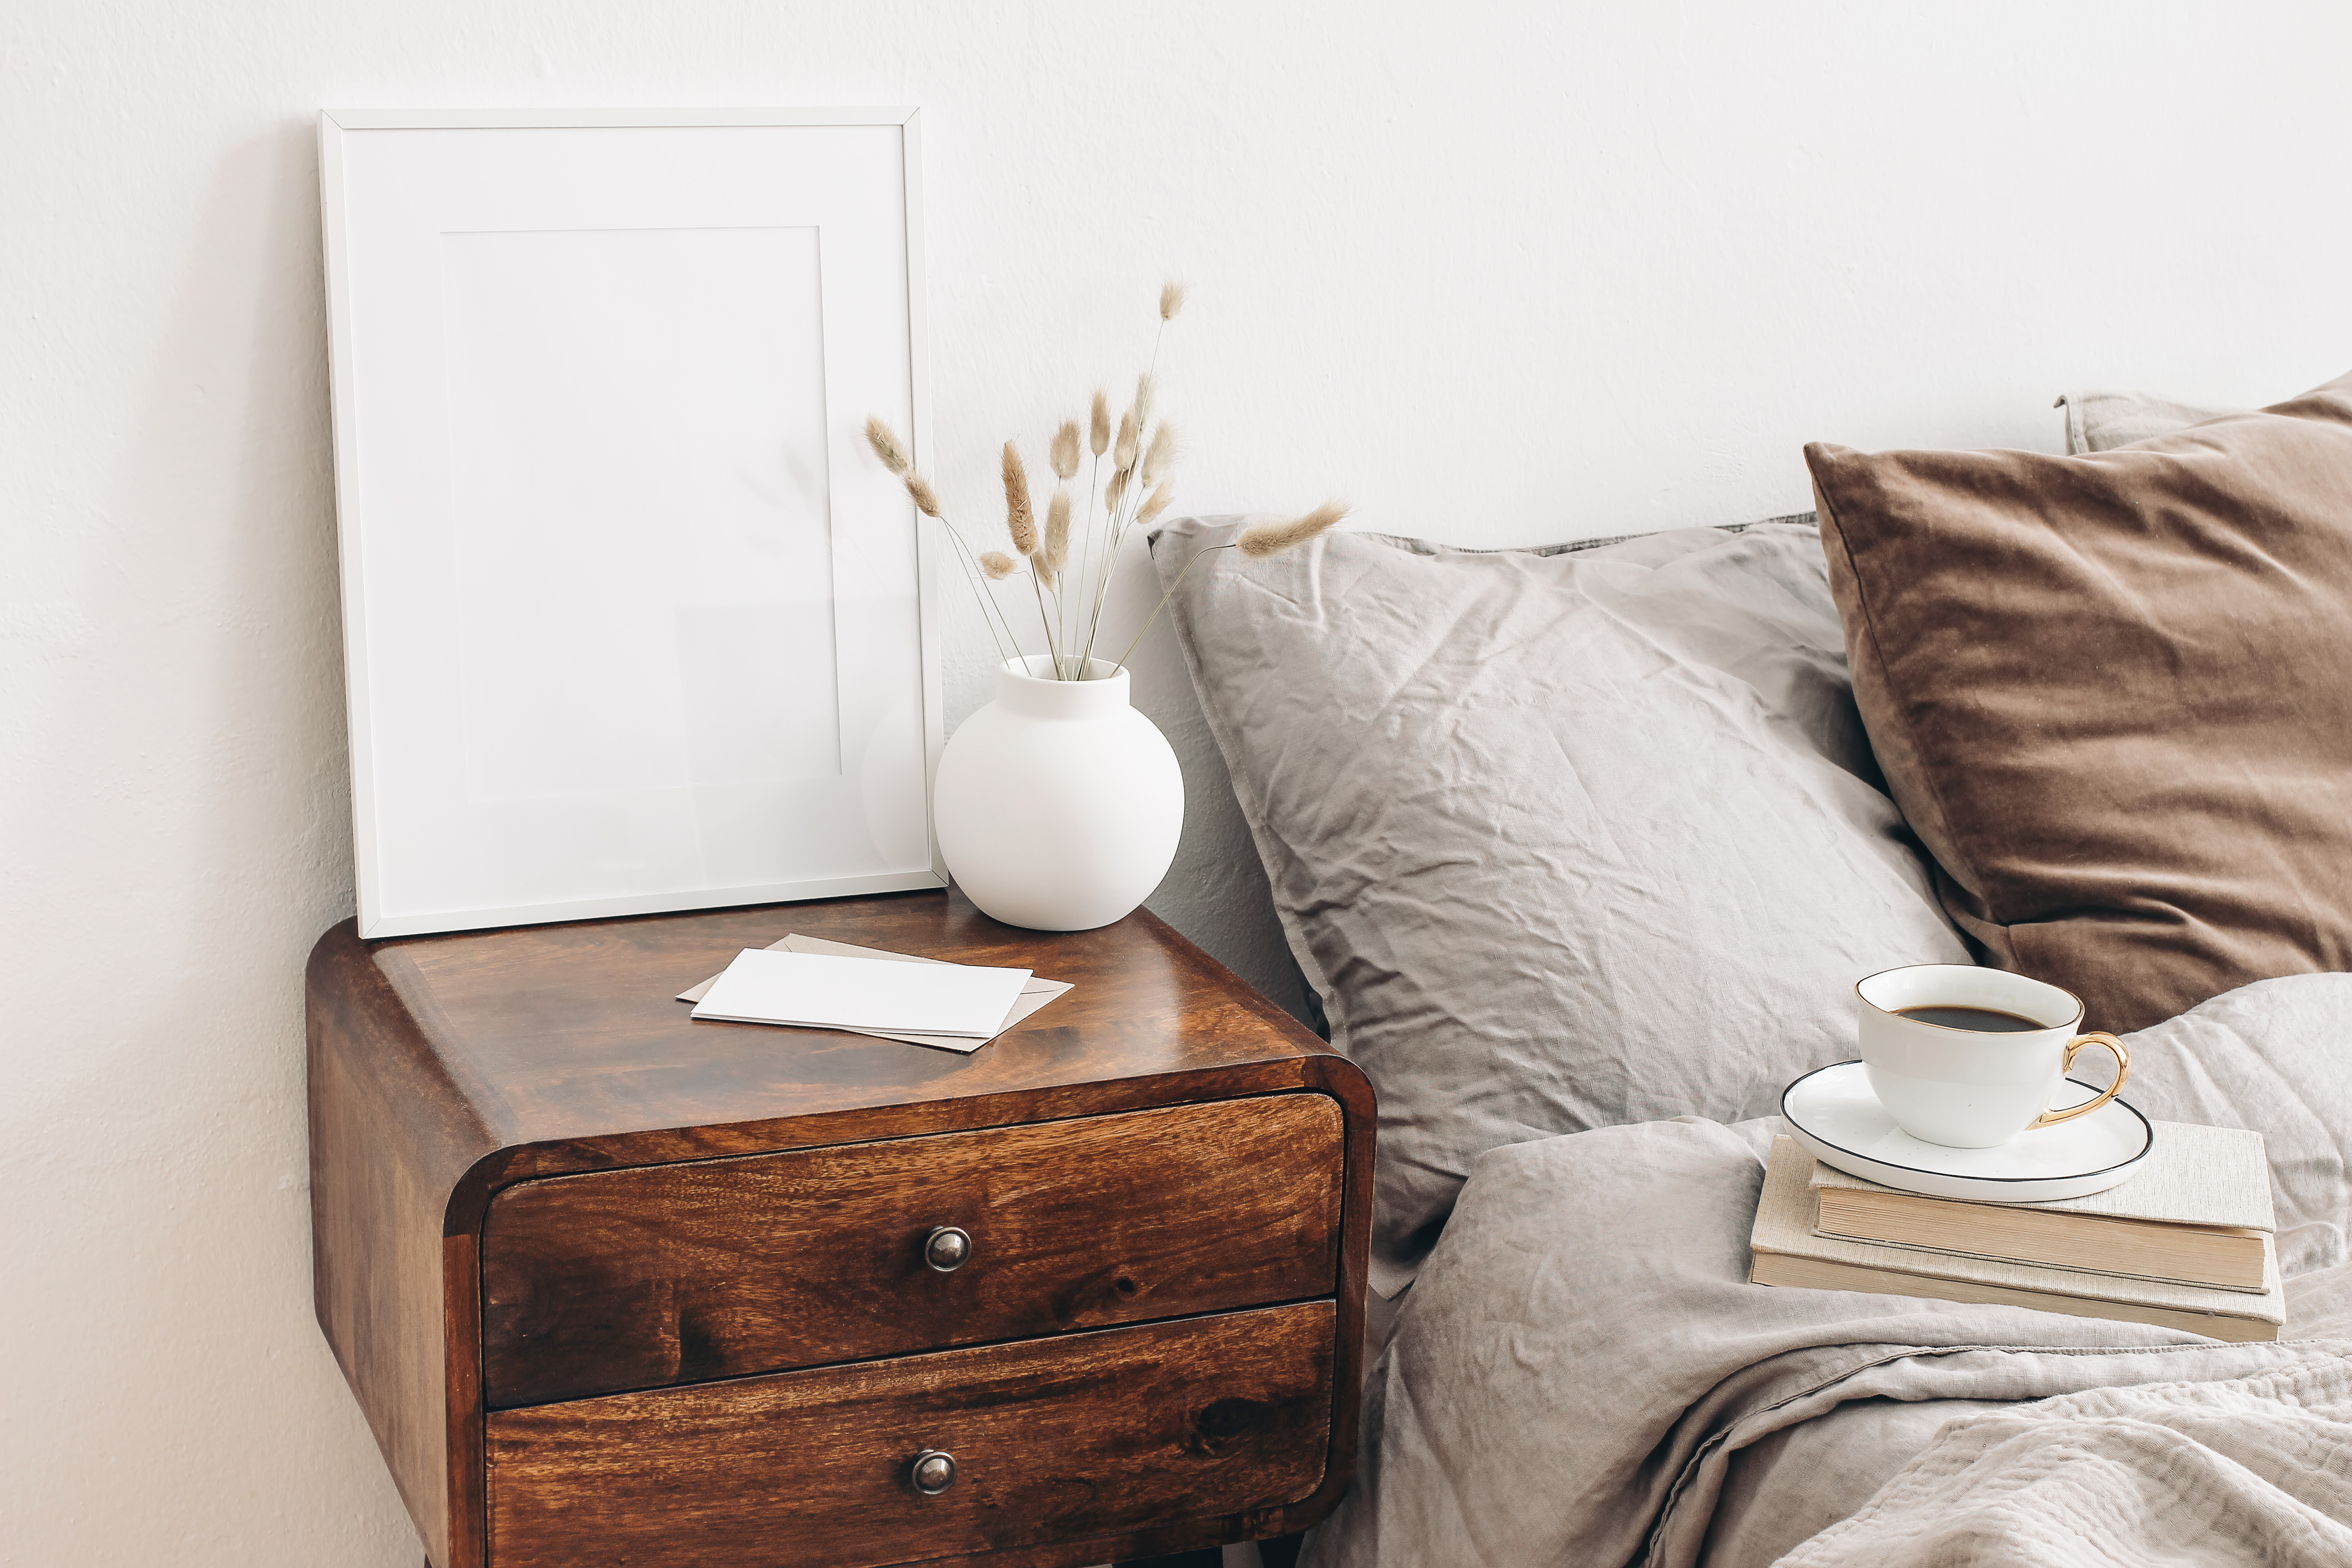 A mid-century modern nightstand featured with décor, books, and a cup of coffee 